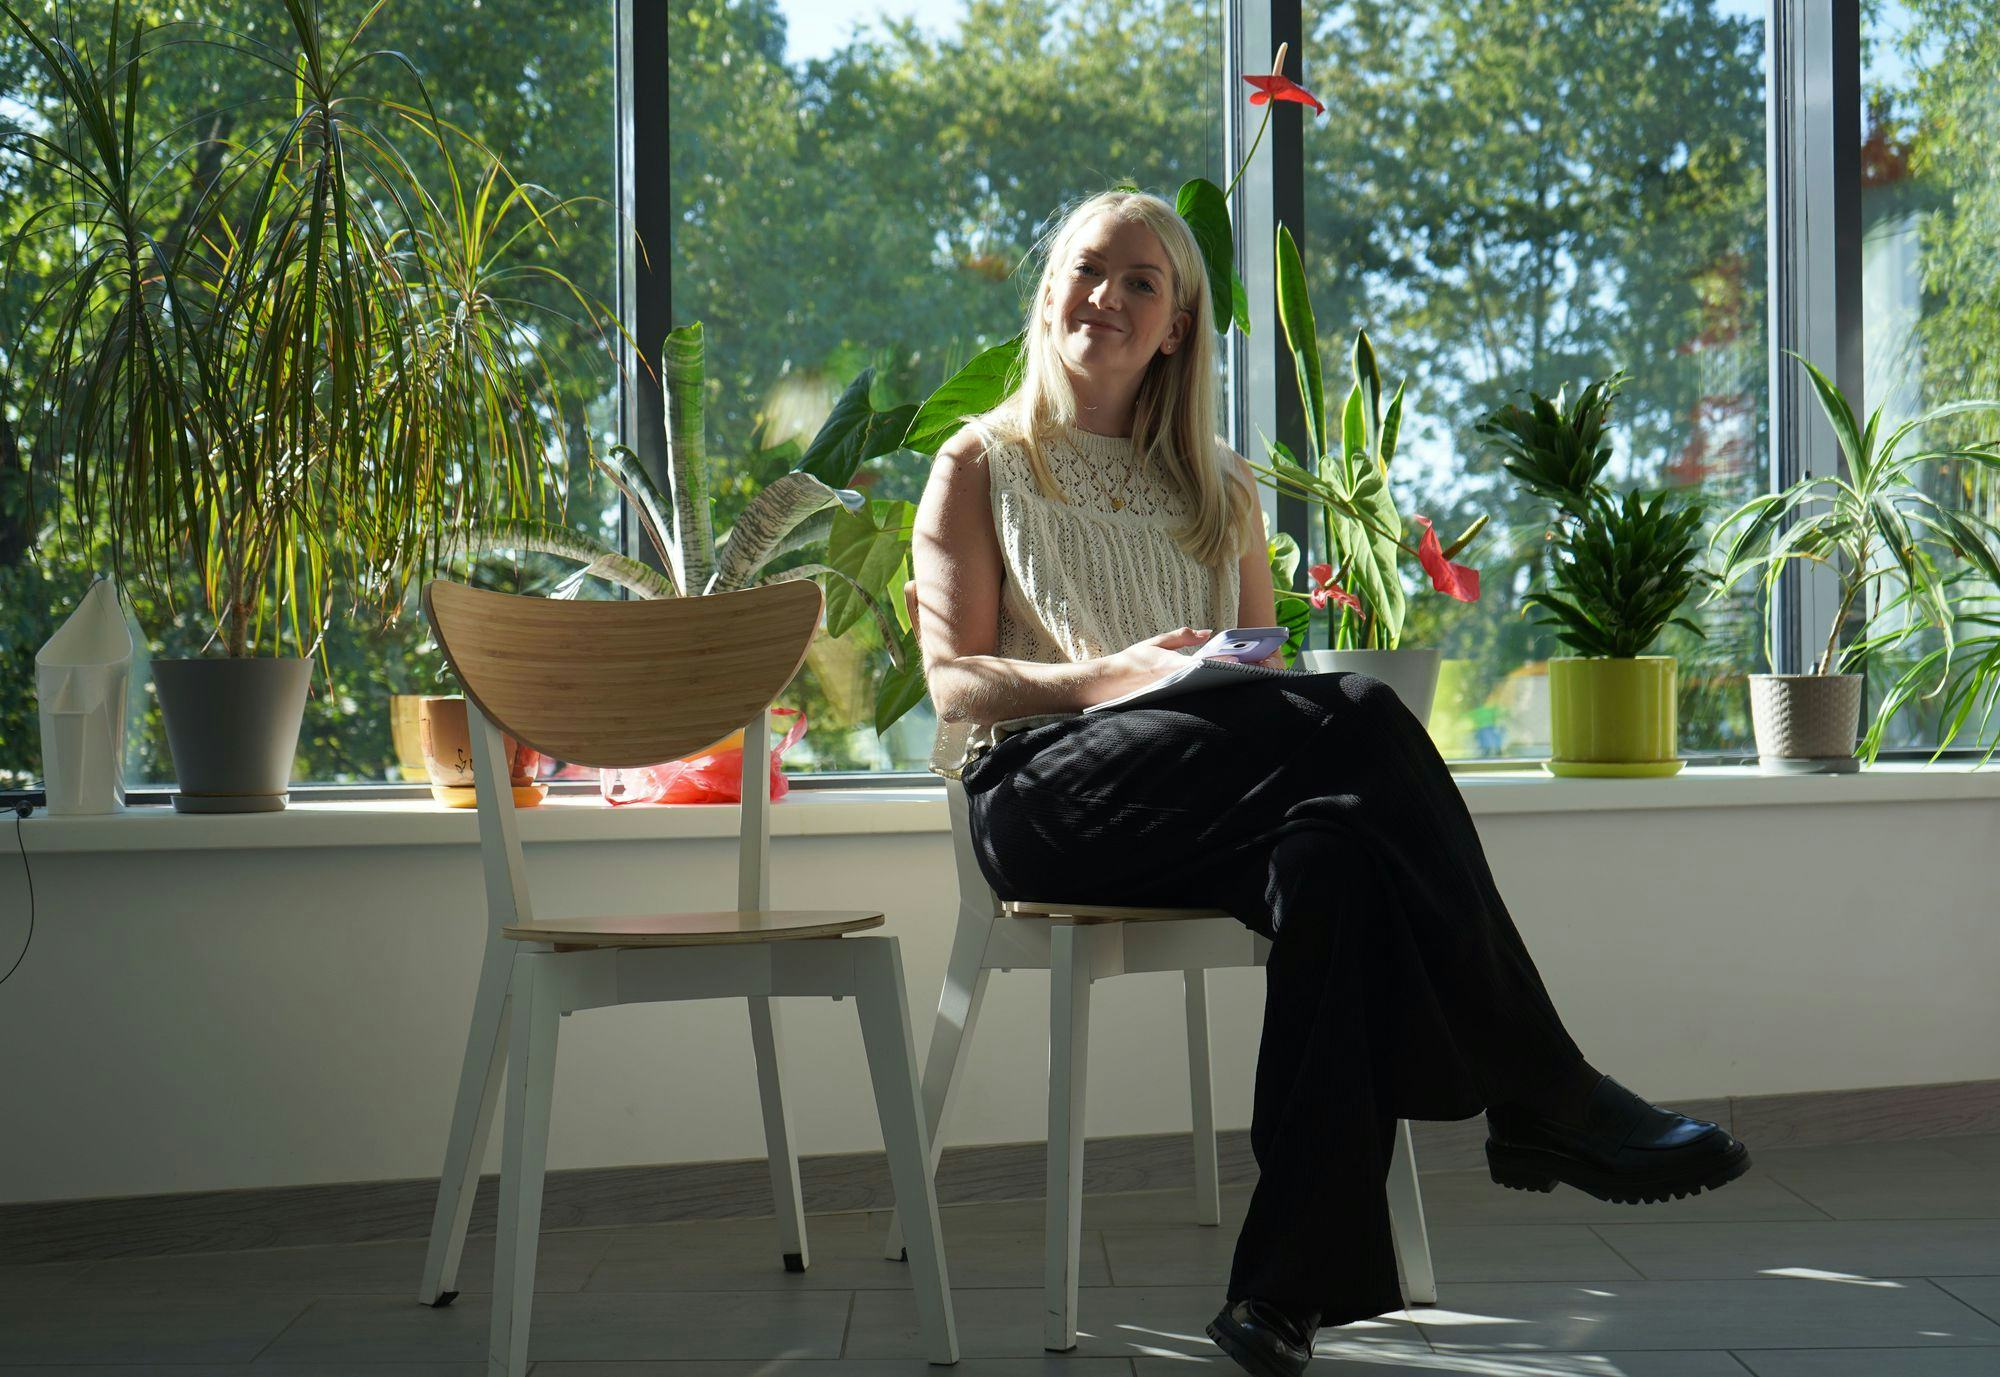 A woman sitting with her back to a window smiling, green plants all around